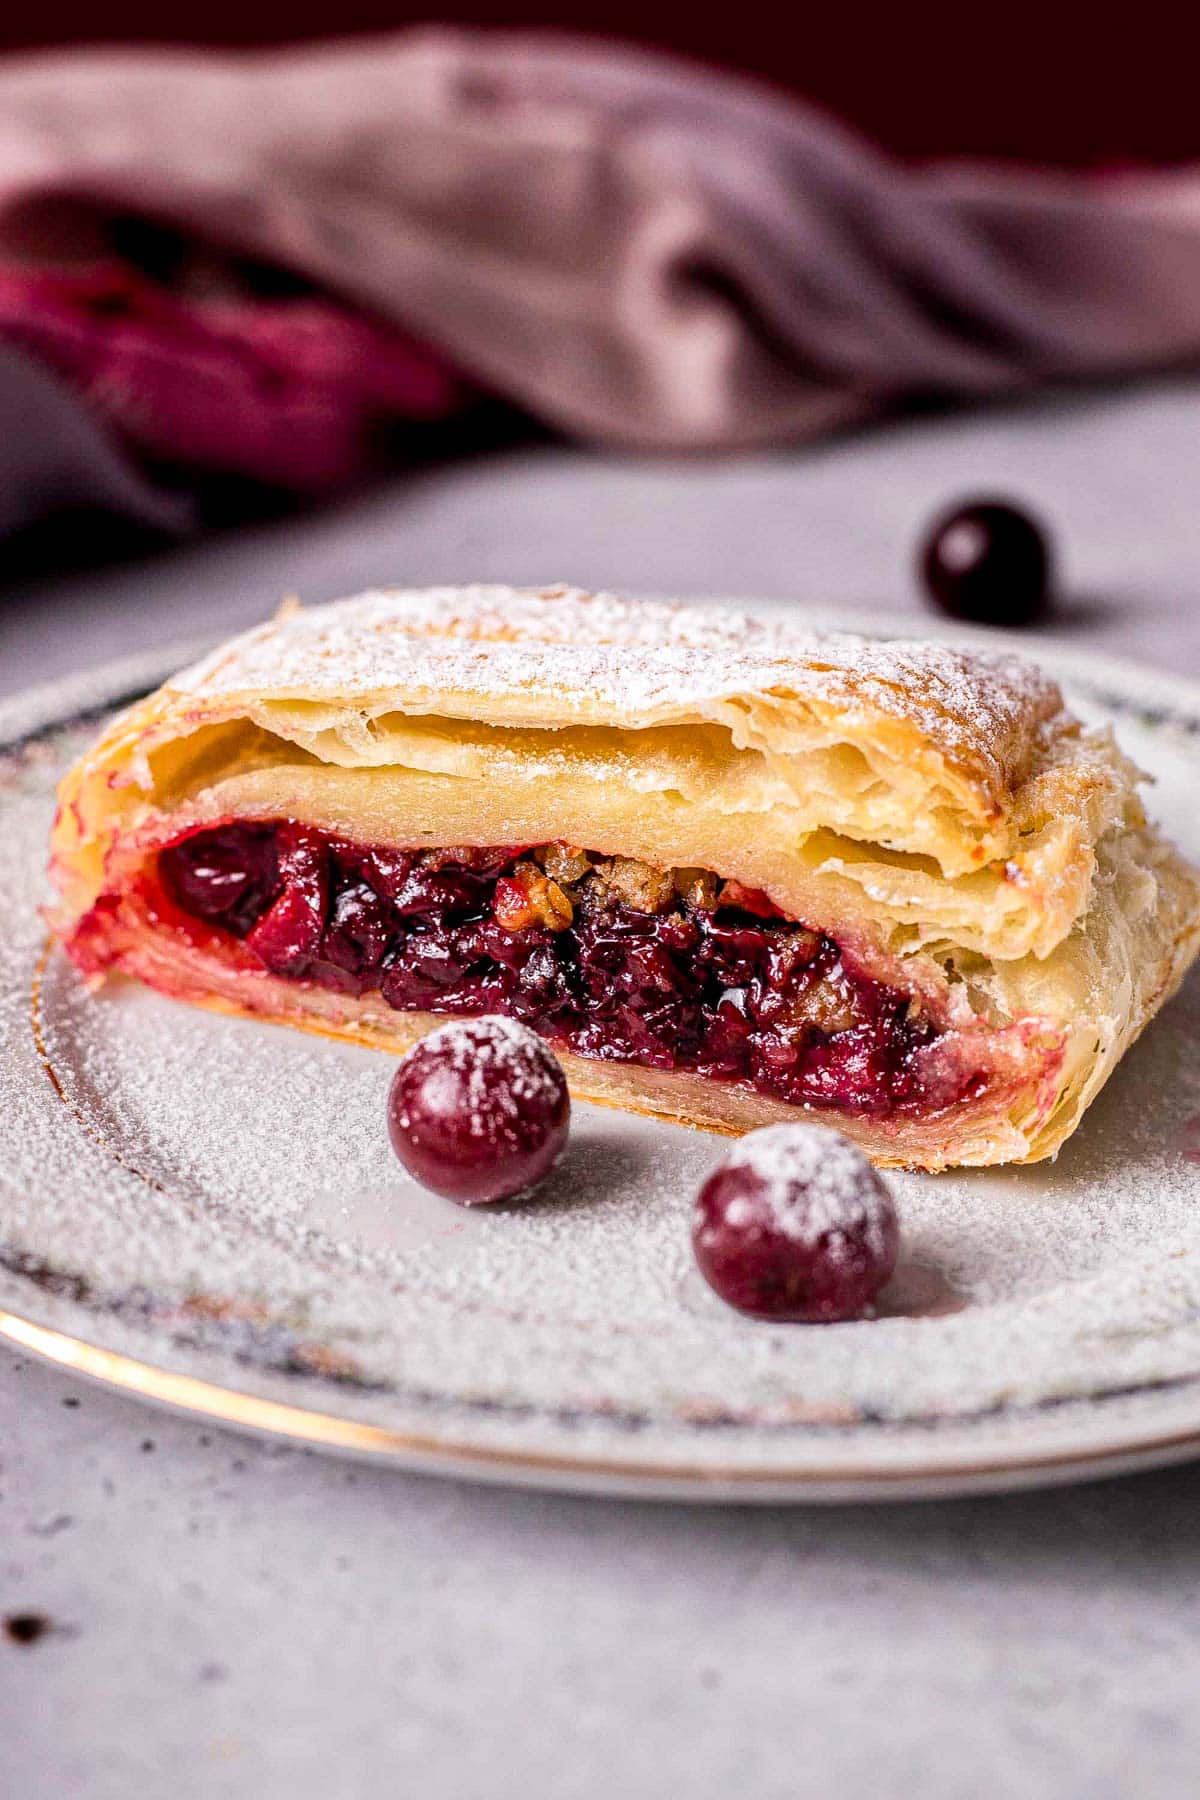 slice of cherry strudel on plate with whole cherries around.